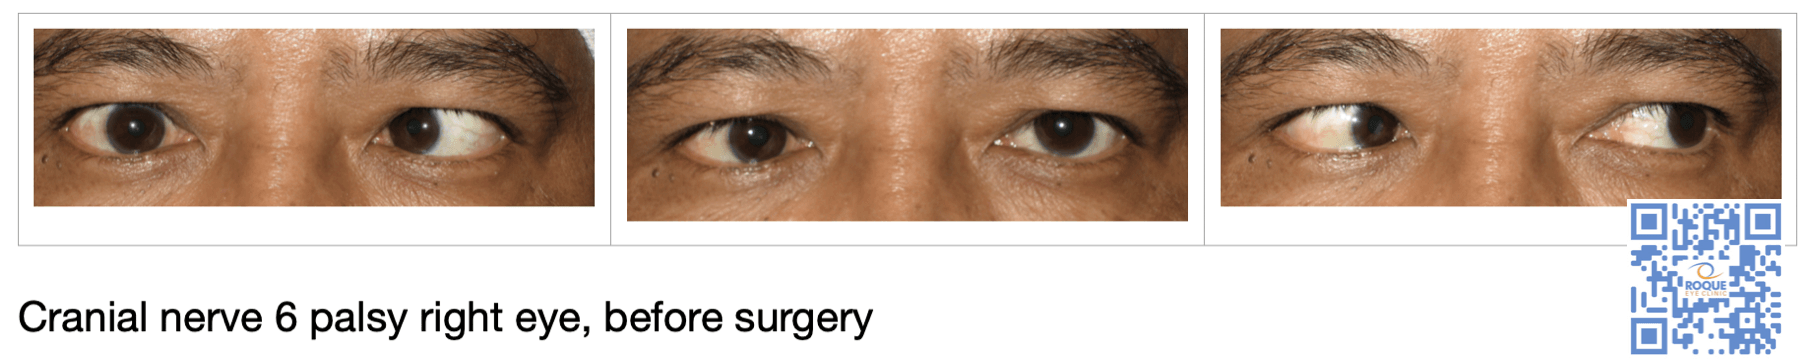 Cranial nerve 6 palsy right eye, before surgery